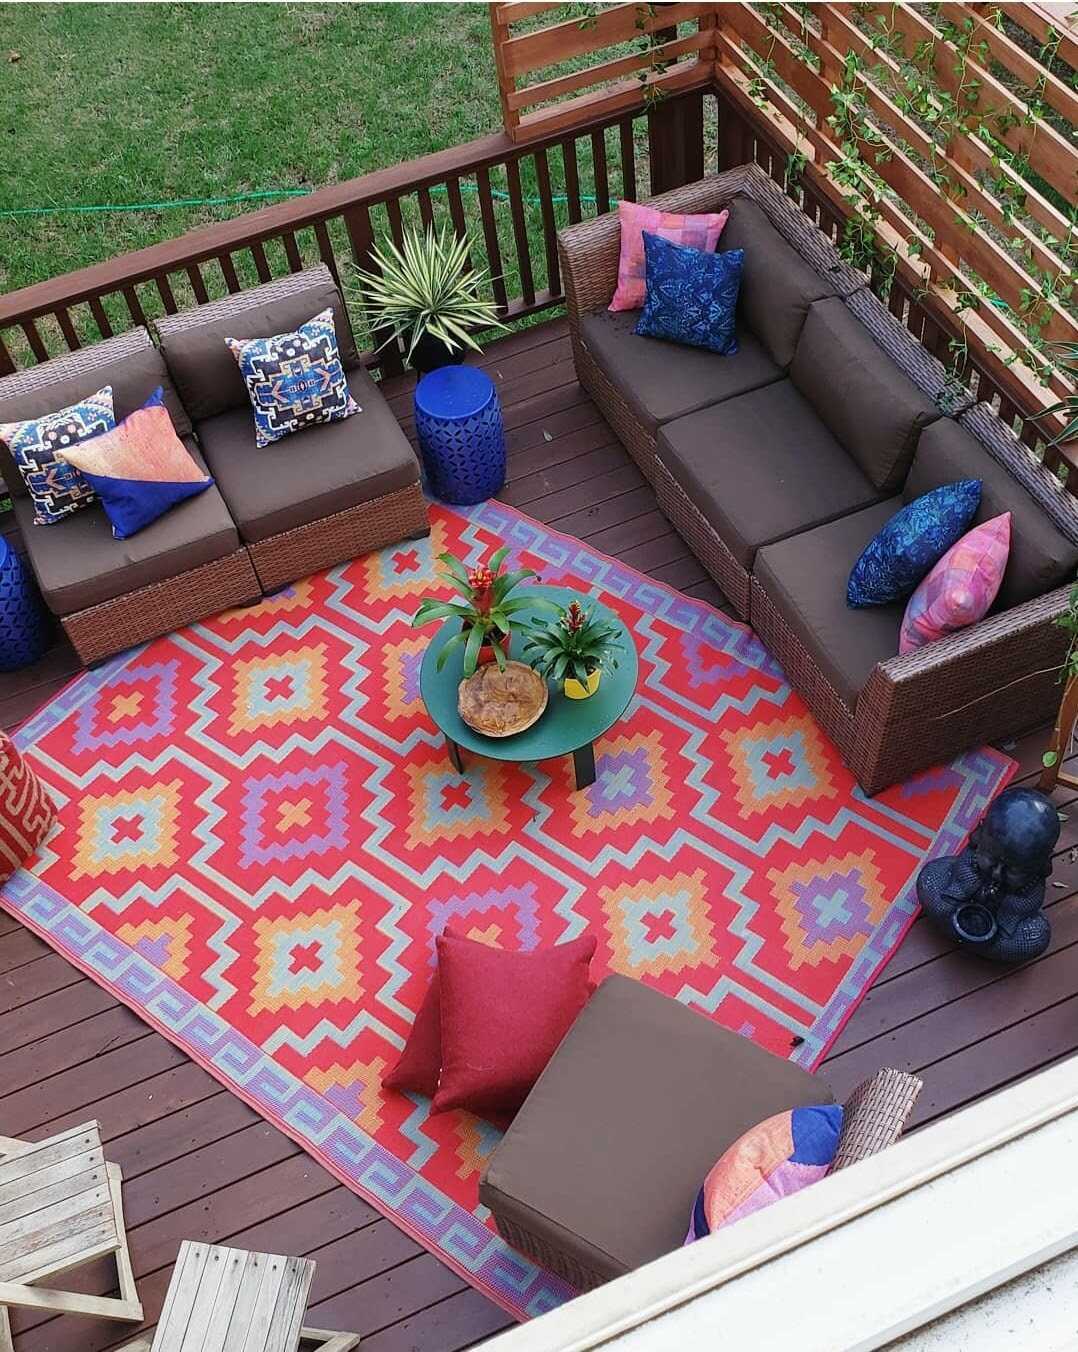 SmithHönig friend and designer Seana Freeman is embracing bold color, pattern and influences from around the world this fall season. To add to her glamorous deck refresh, Freeman turned to our exclusive line of outdoor pillows to fit in with her look and quality. Read on to see how you too can refresh your outdoor space with new fall decor.